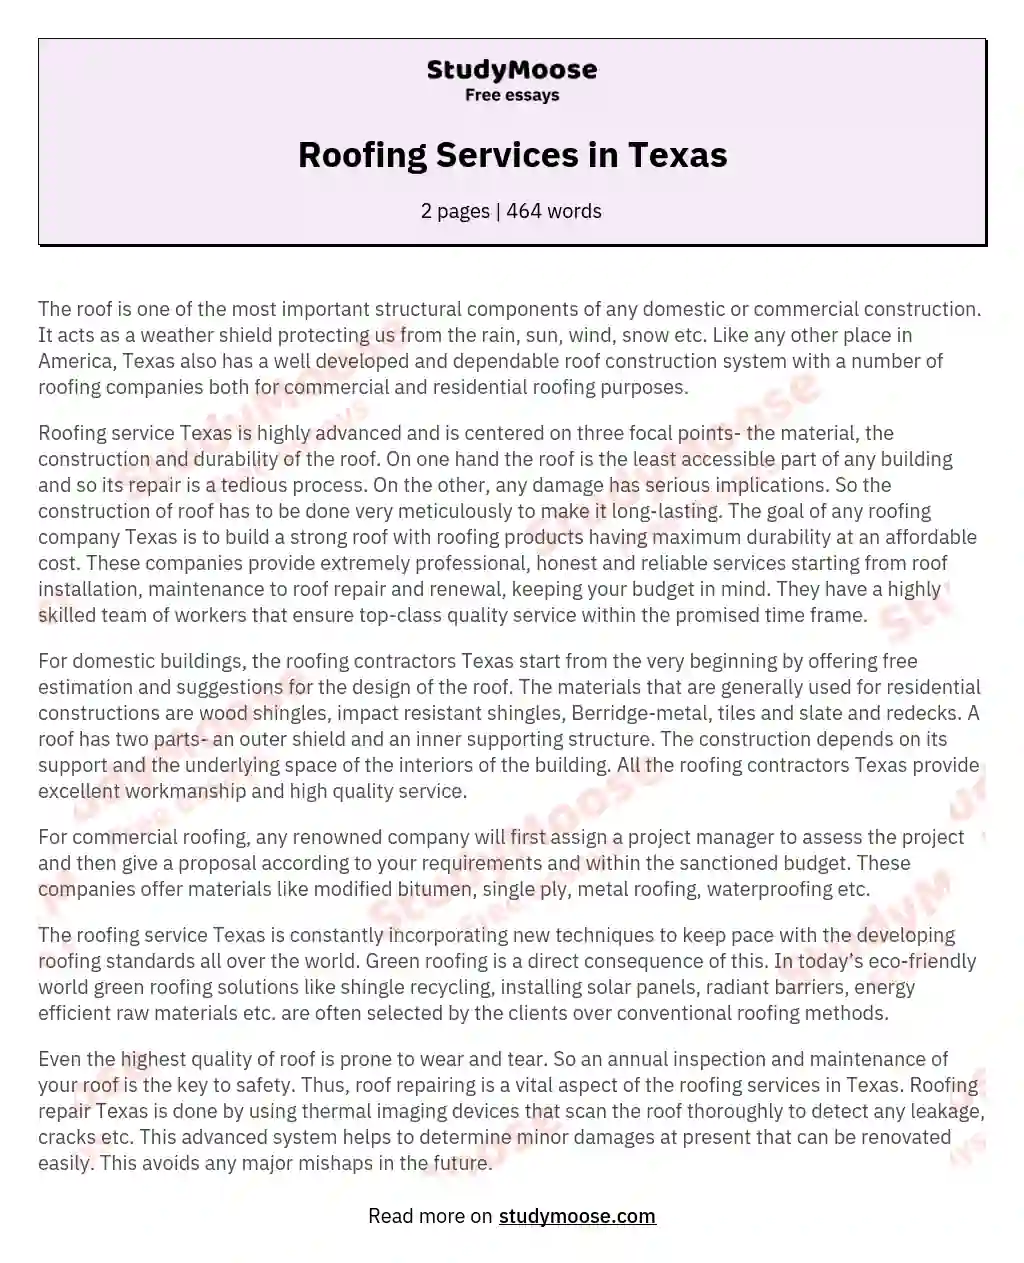 Roofing Services in Texas essay